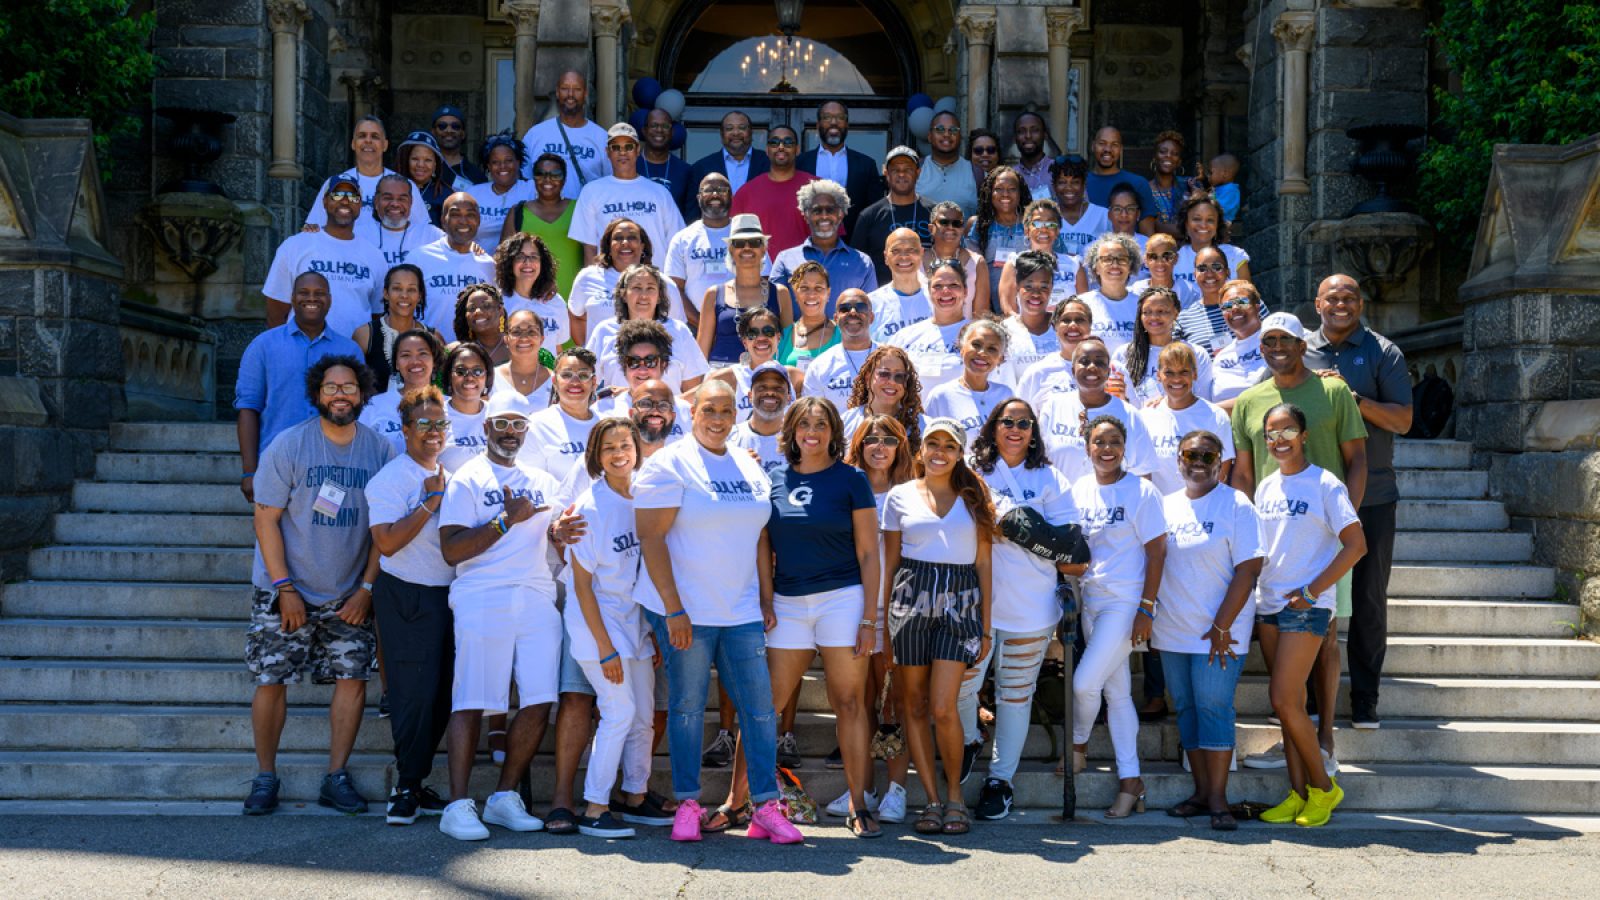 Members of the organizes the Soul Hoyas pose for a picture on the steps of Healy Hall during their annual reunion event. Many of the group members wear white T-shirts that say, &quot;Soul Hoya Alumni&quot;